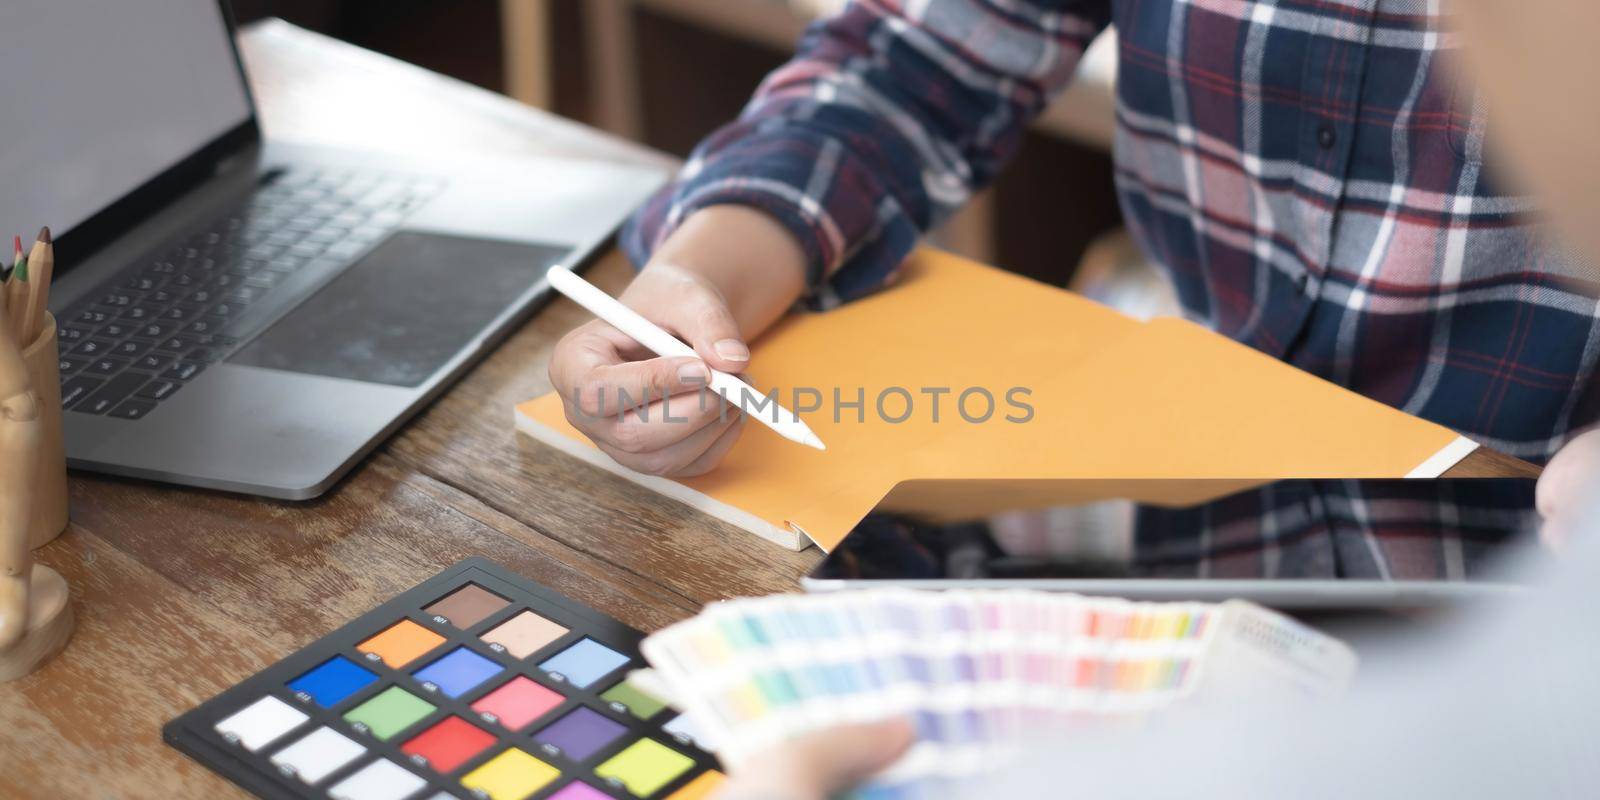 Team of creative graphic designer working on color swatch samples chart for selection coloring in inspiration to create new collection at workplace.